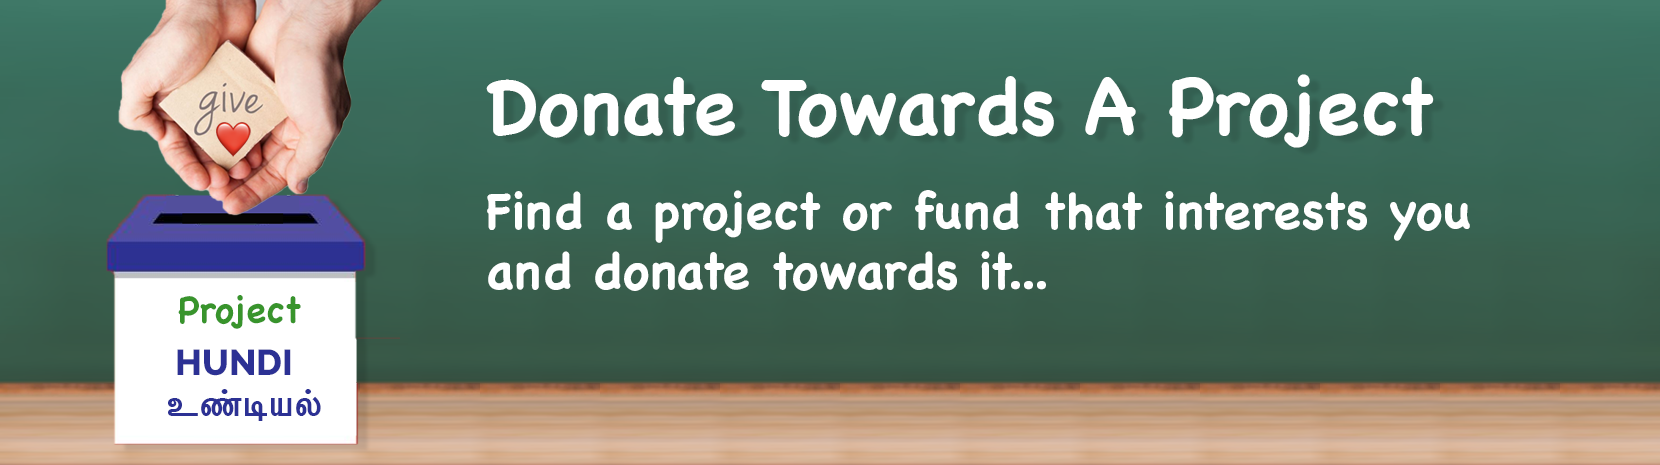 Donate Towards A Project